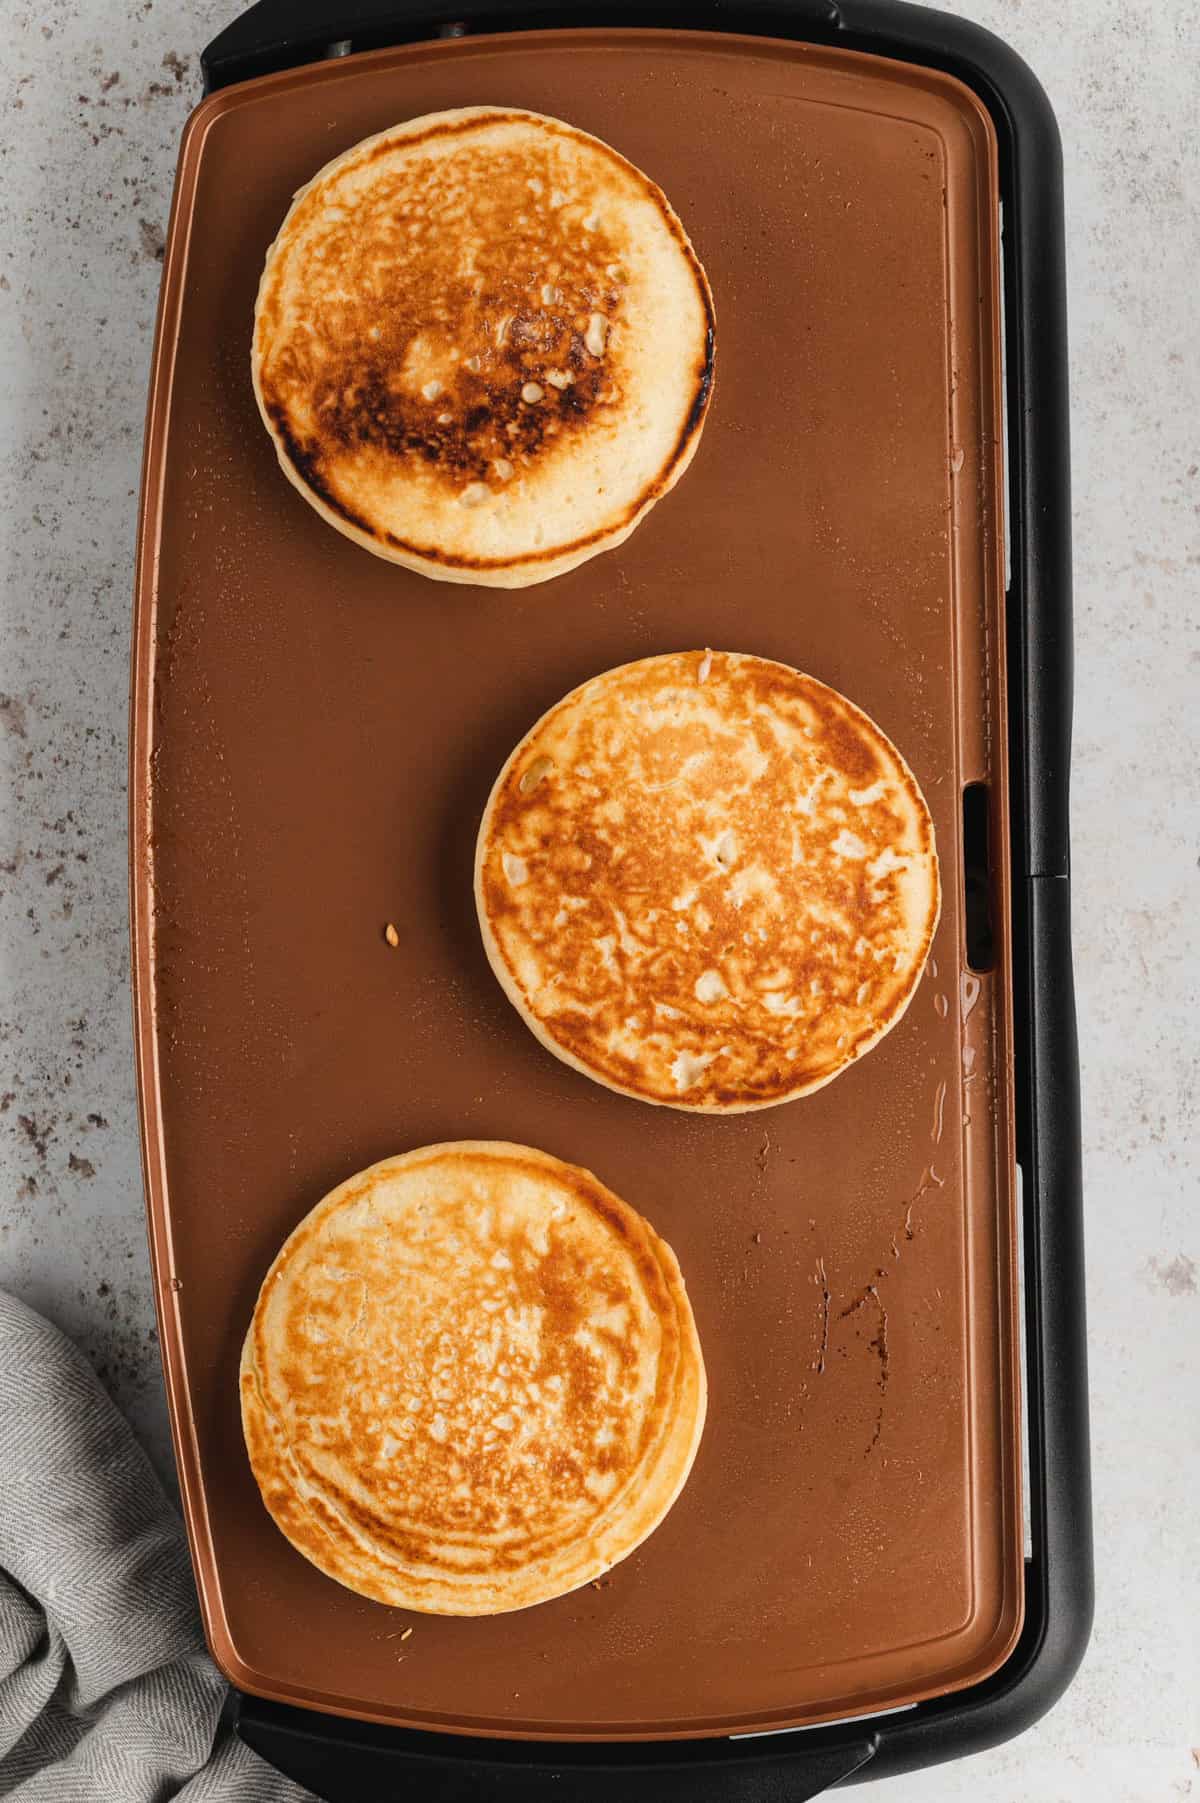 Golden brown pancakes on greased griddle for Homemade Pancakes Recipe